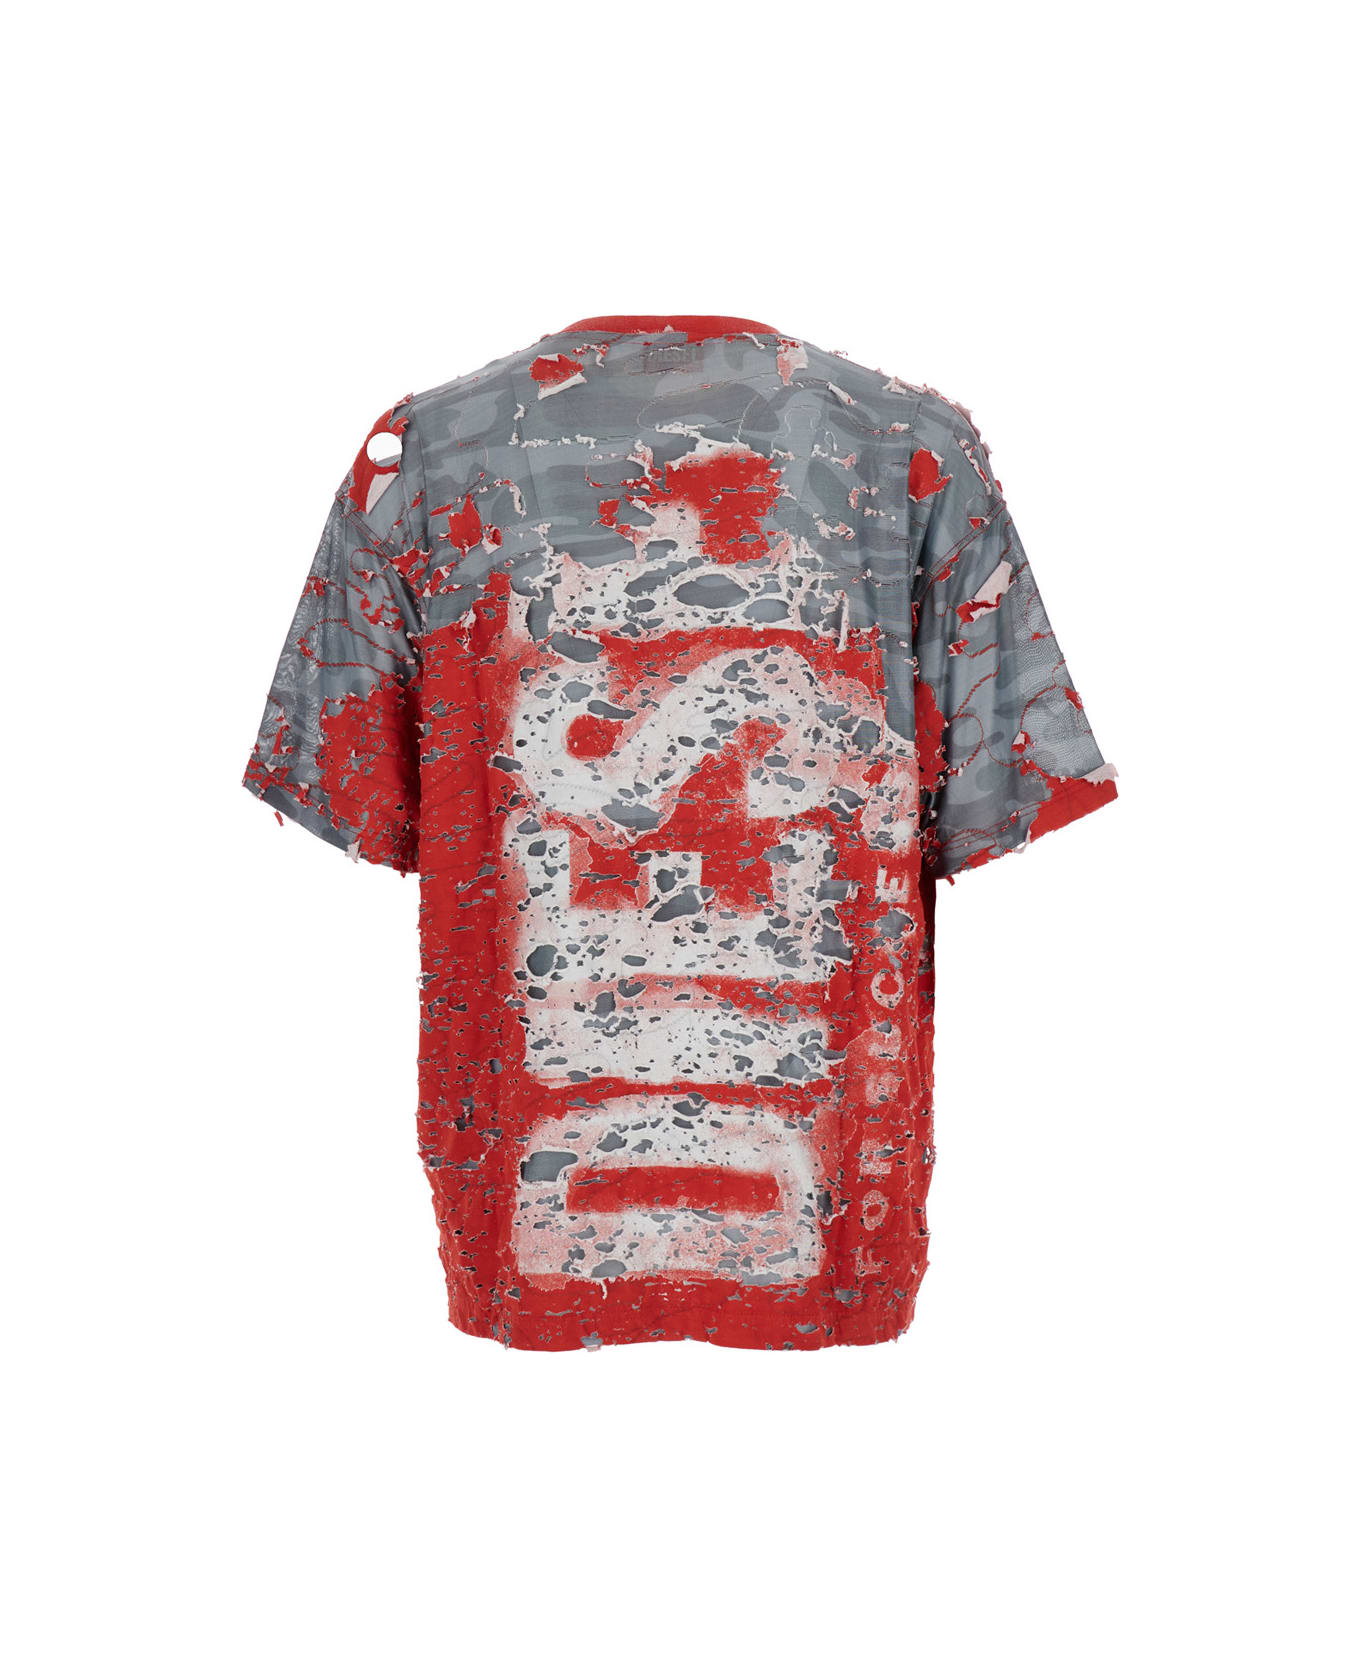 Diesel 't-boxt-peel' Red And Grey T-shirt With Destroyed Effect And Camouflage Print In Cotton Blend Man - Multicolor シャツ